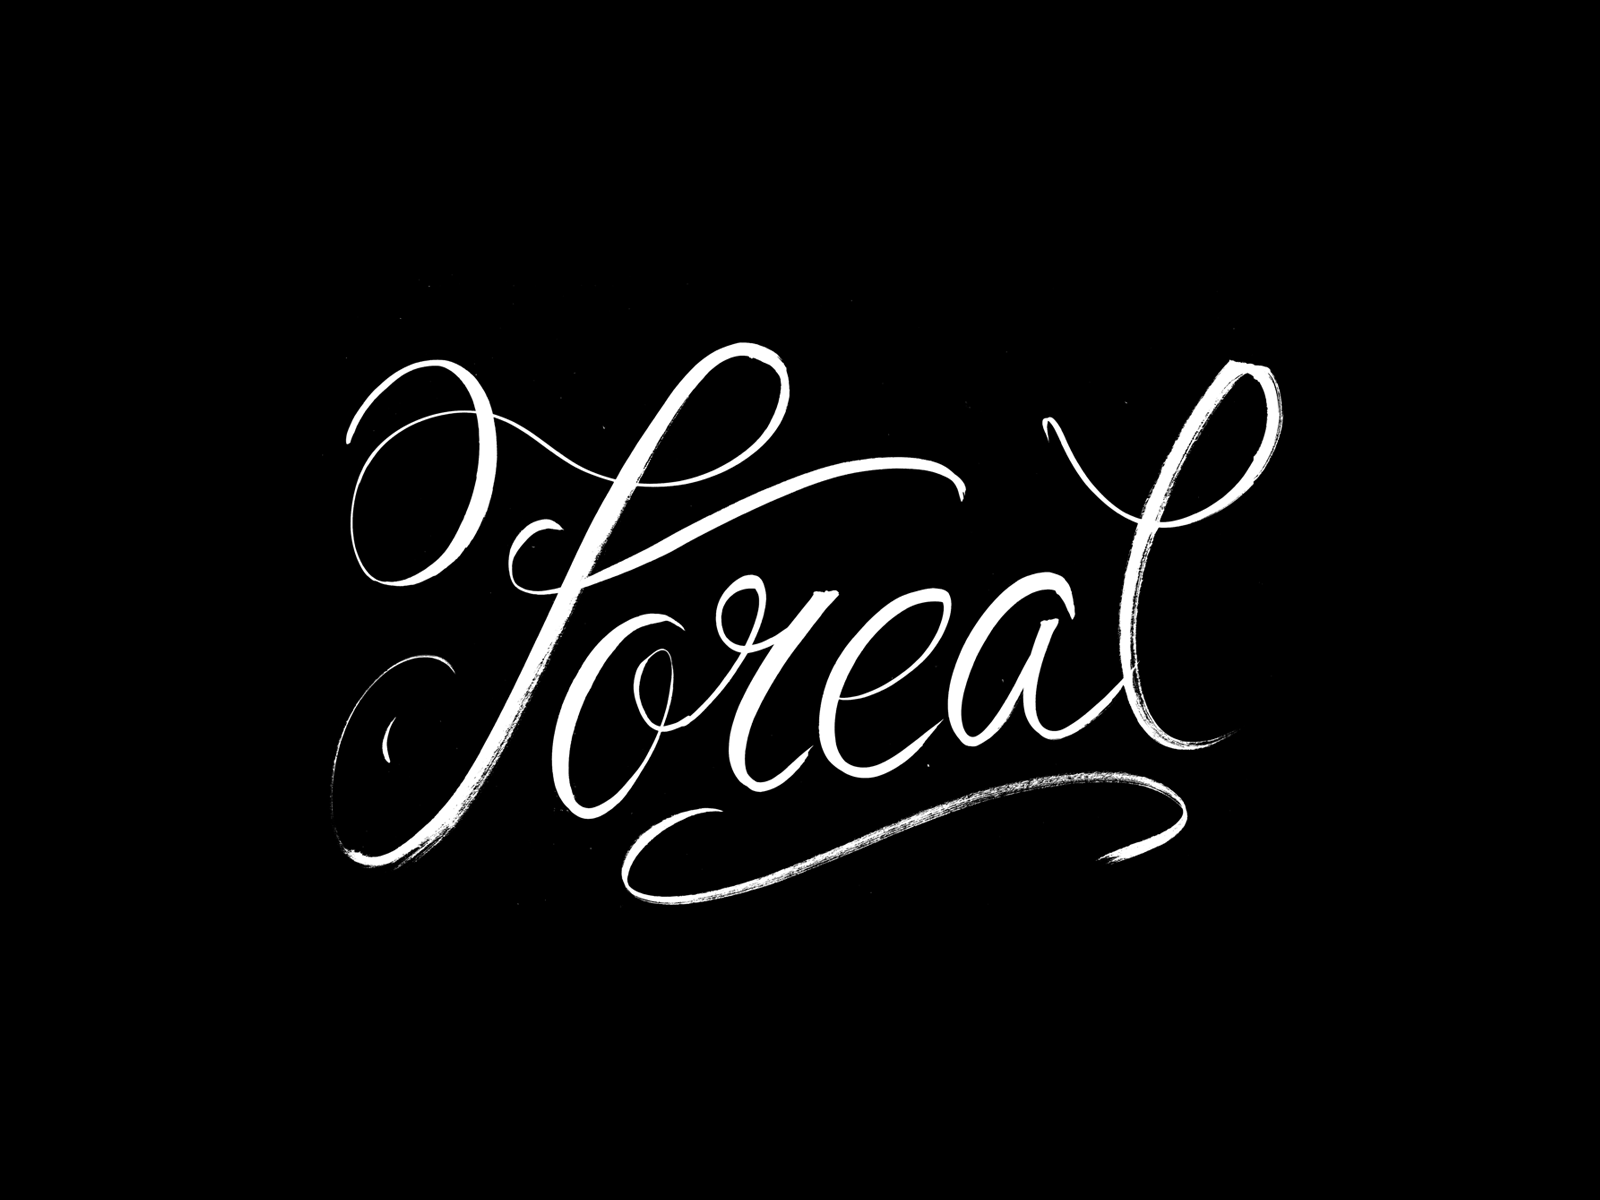 Foreal By Arthur W Presser On Dribbble 4994